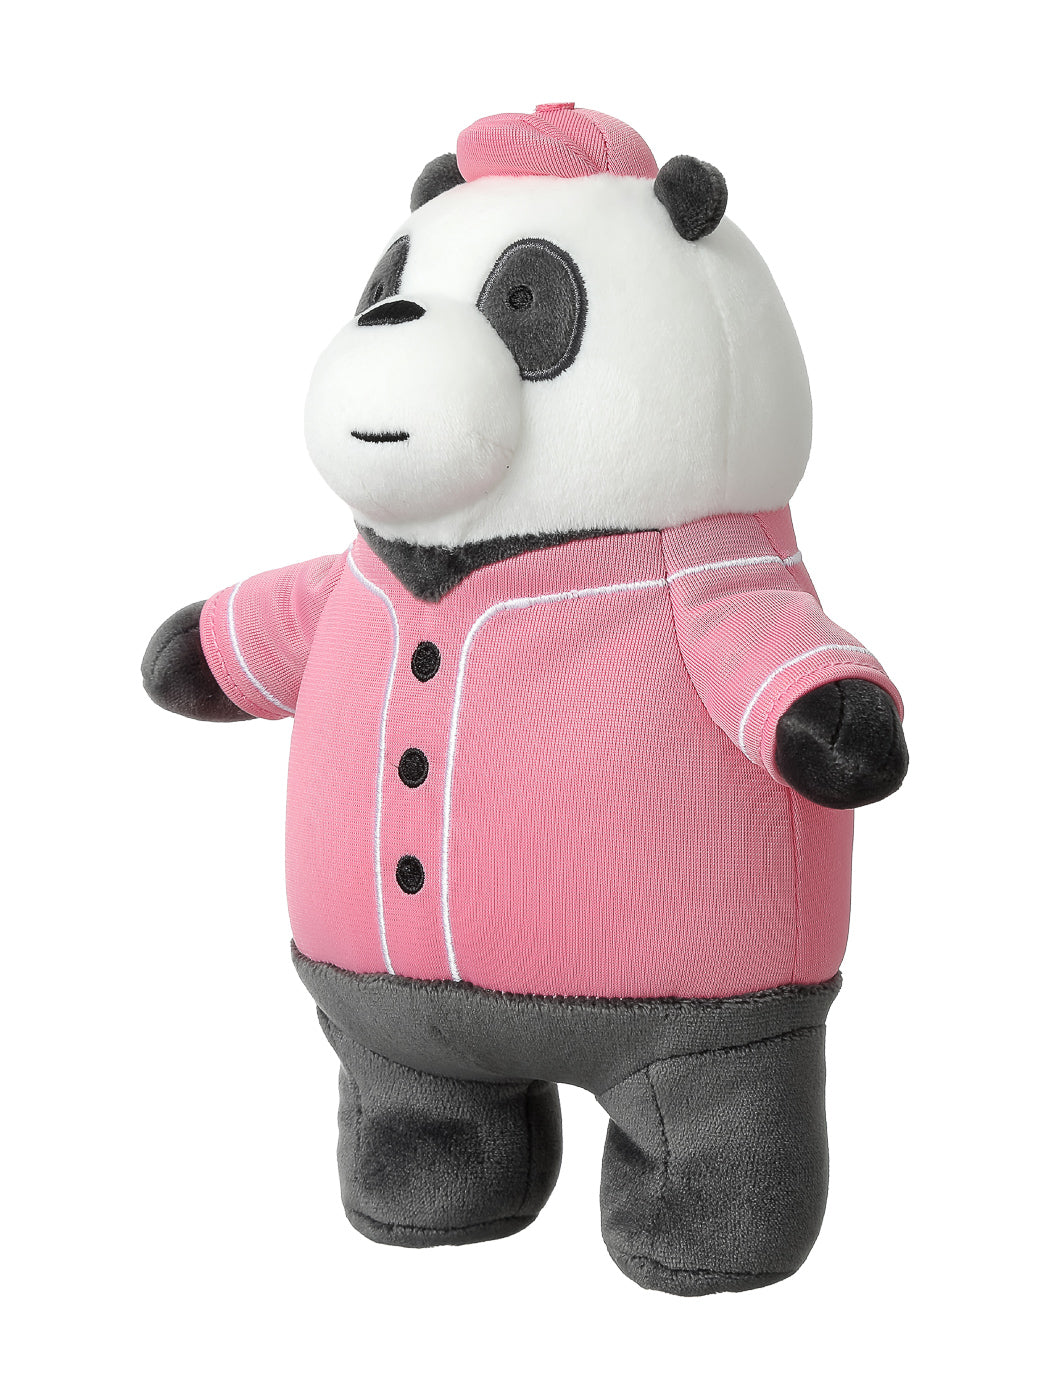 MINISO WE BARE BEARS COLLECTION 4.0 PLUSH TOY WITH OUTFIT(PANDA) 2010623810106 IP PLUSH